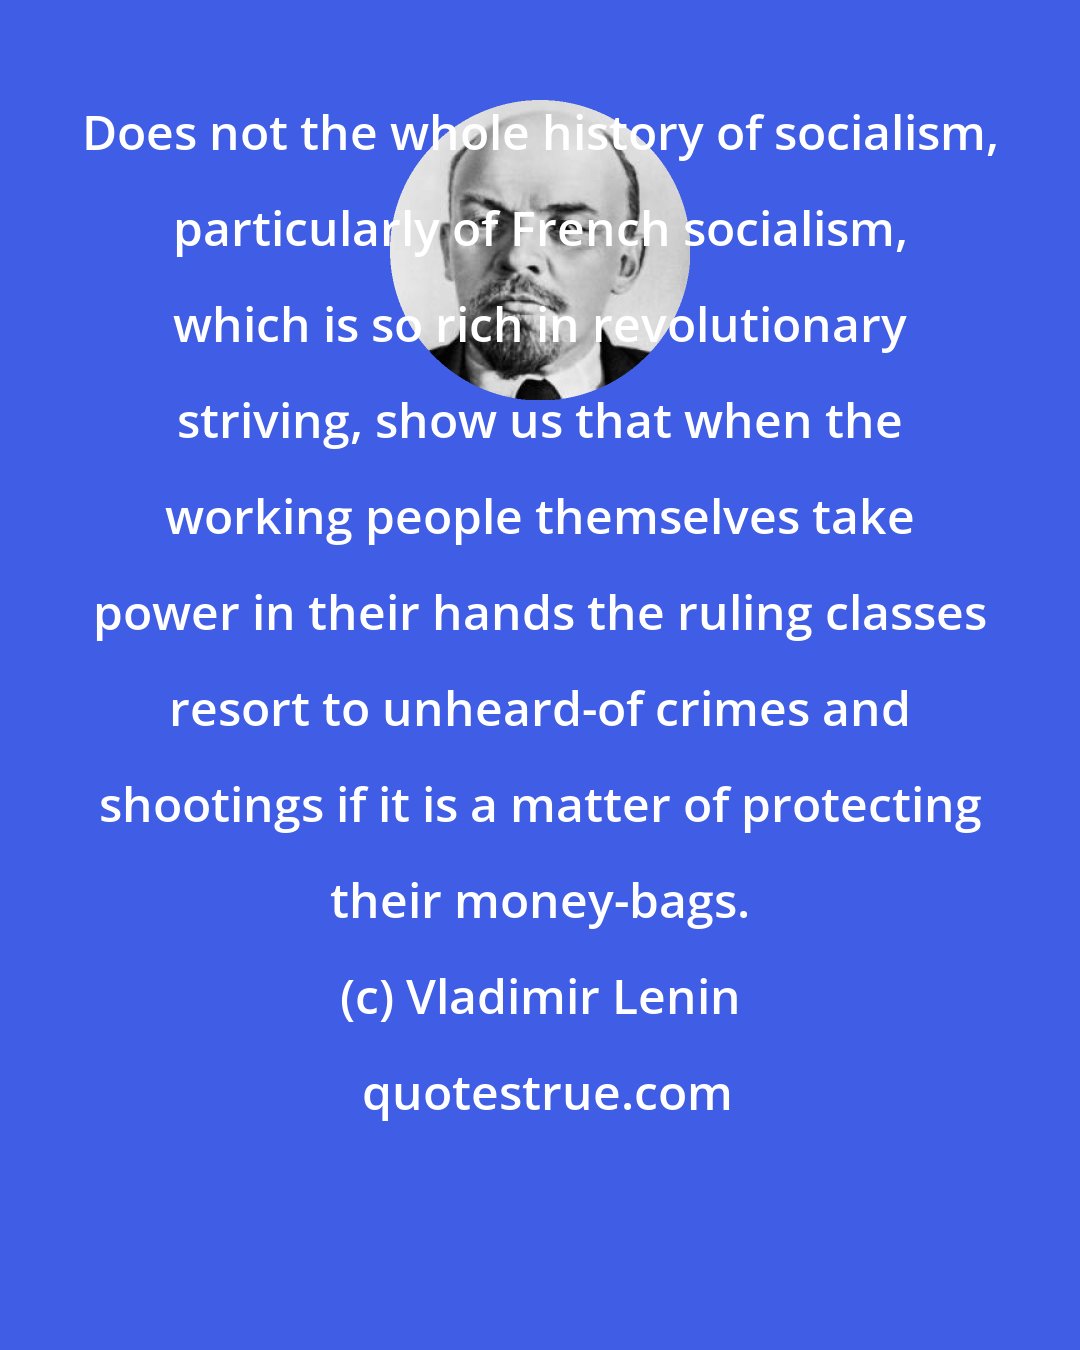 Vladimir Lenin: Does not the whole history of socialism, particularly of French socialism, which is so rich in revolutionary striving, show us that when the working people themselves take power in their hands the ruling classes resort to unheard-of crimes and shootings if it is a matter of protecting their money-bags.